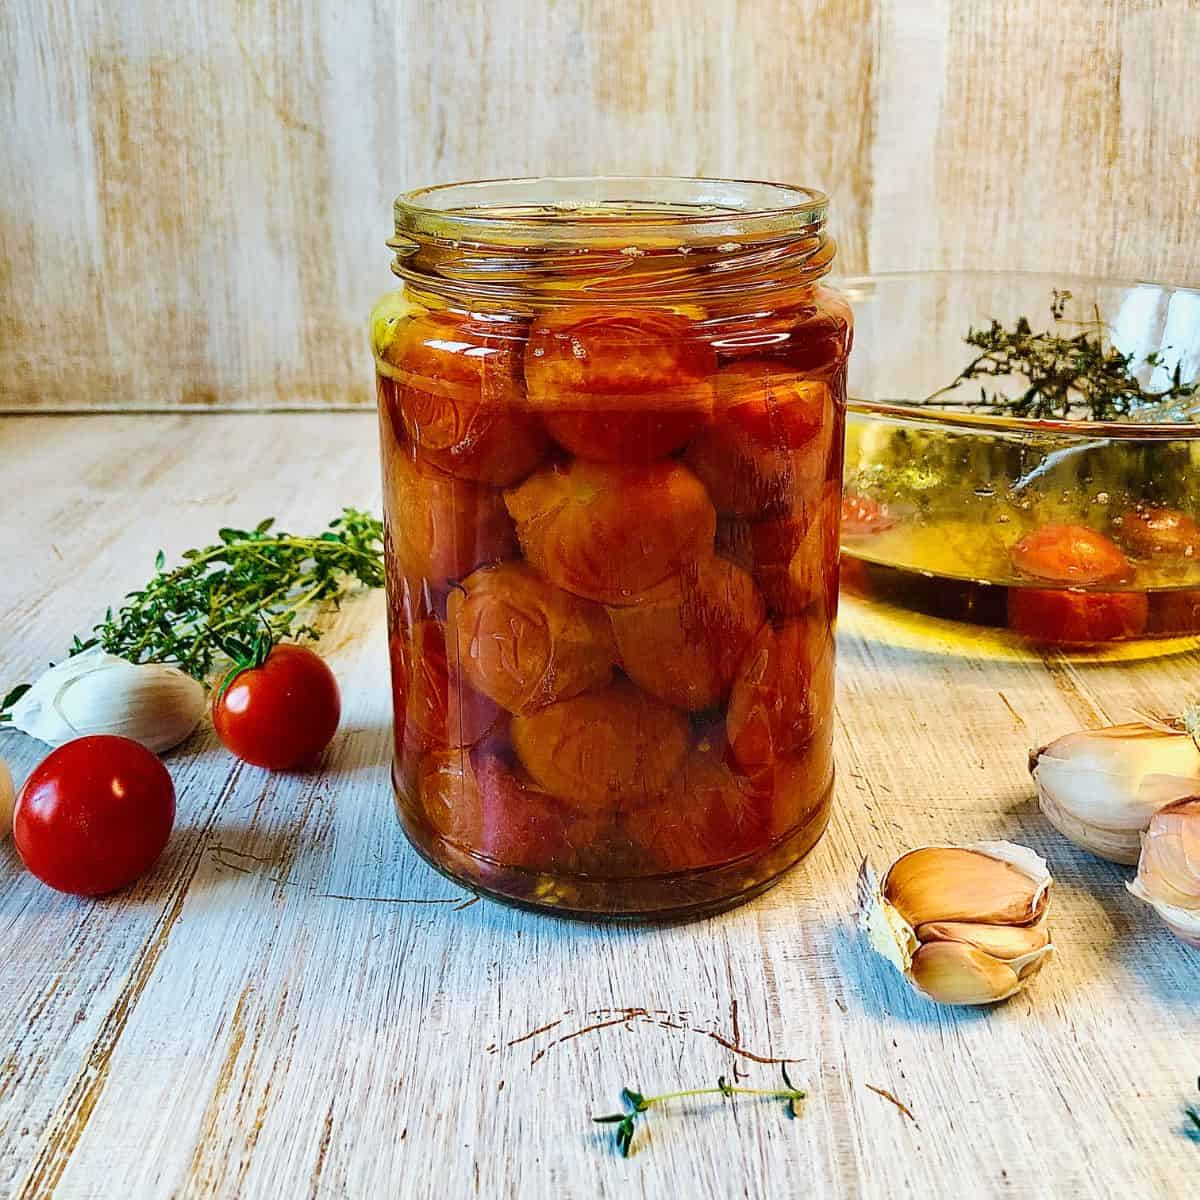 A jar containing confit cherry tomatoes.